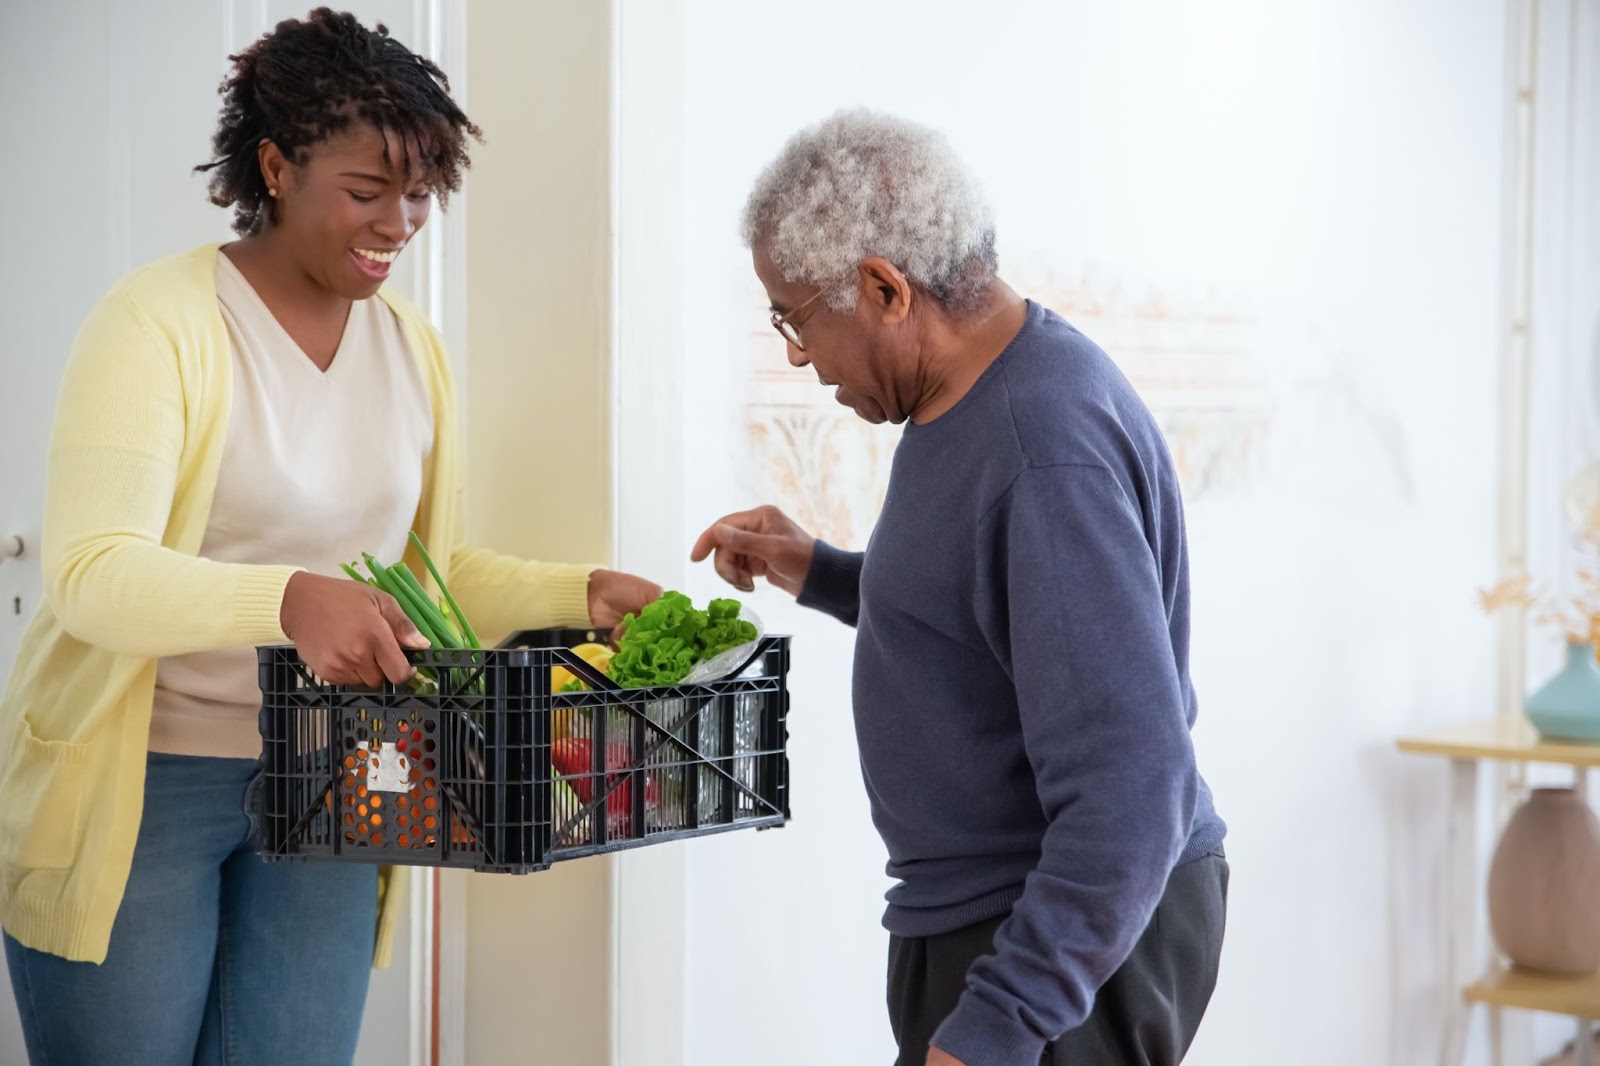 A senior citizen picking vegetables out of a basket and potentially receiving one of the 5 levels of care in assisted living